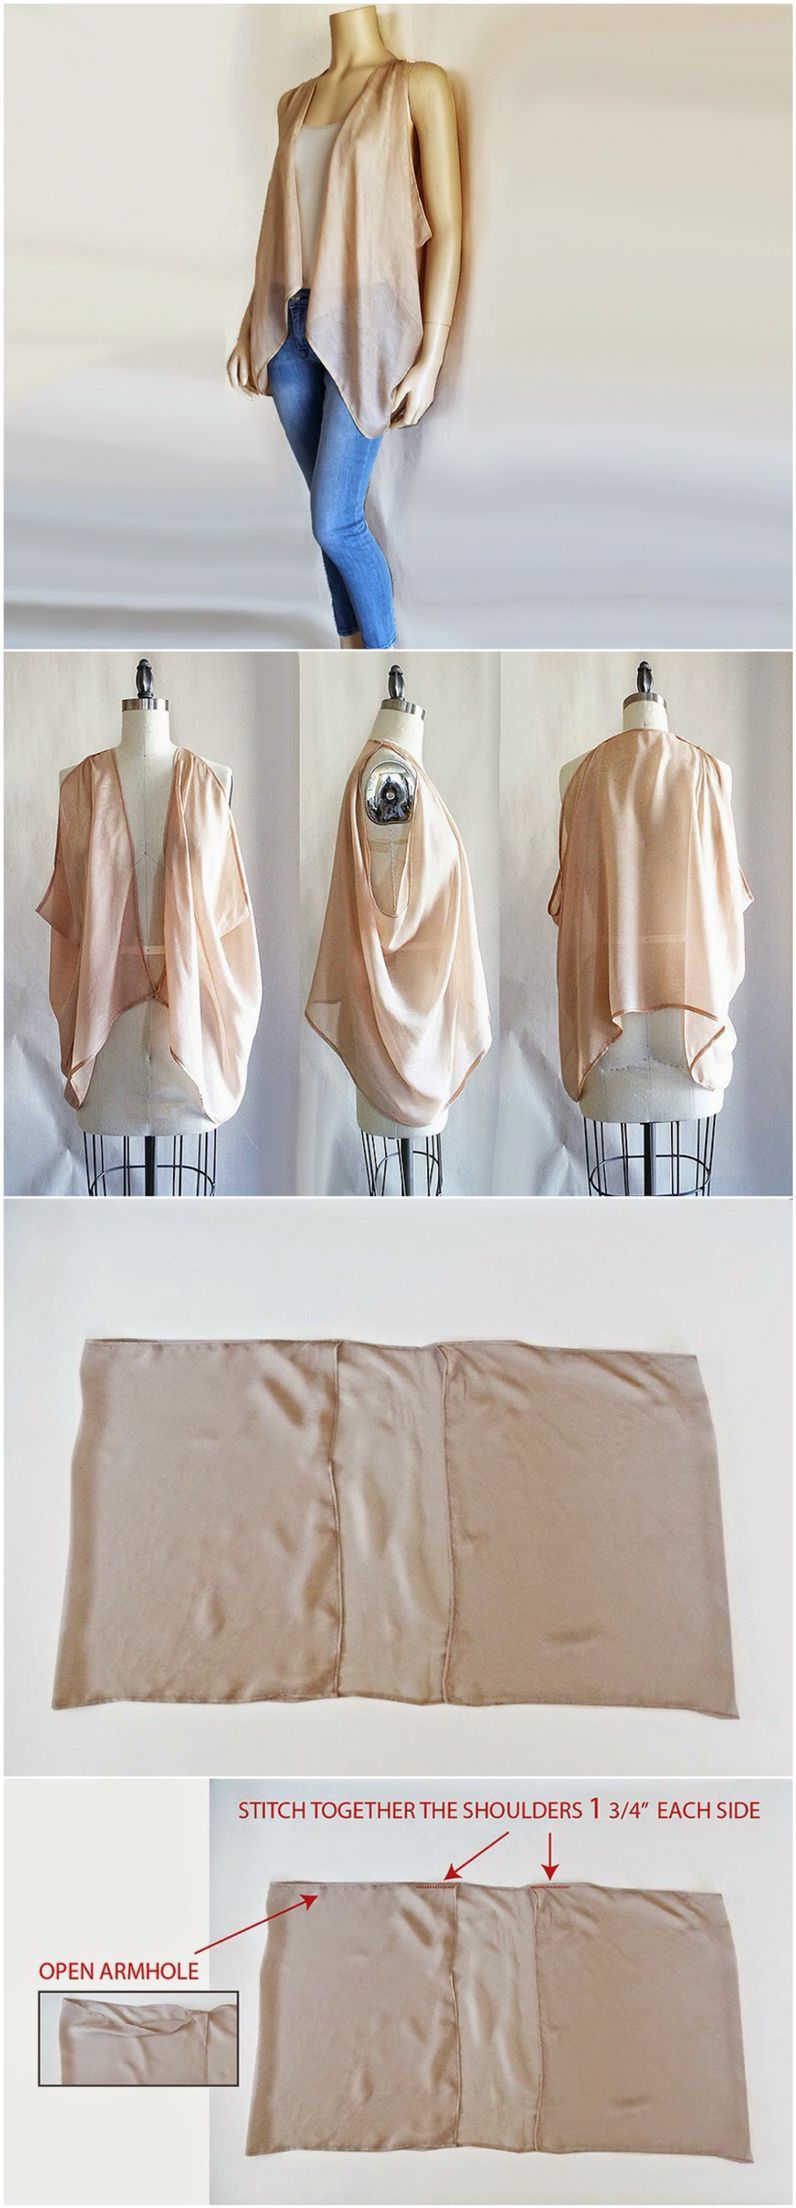 Vest from Scarf Upcycled -   25 fabric crafts clothes
 ideas